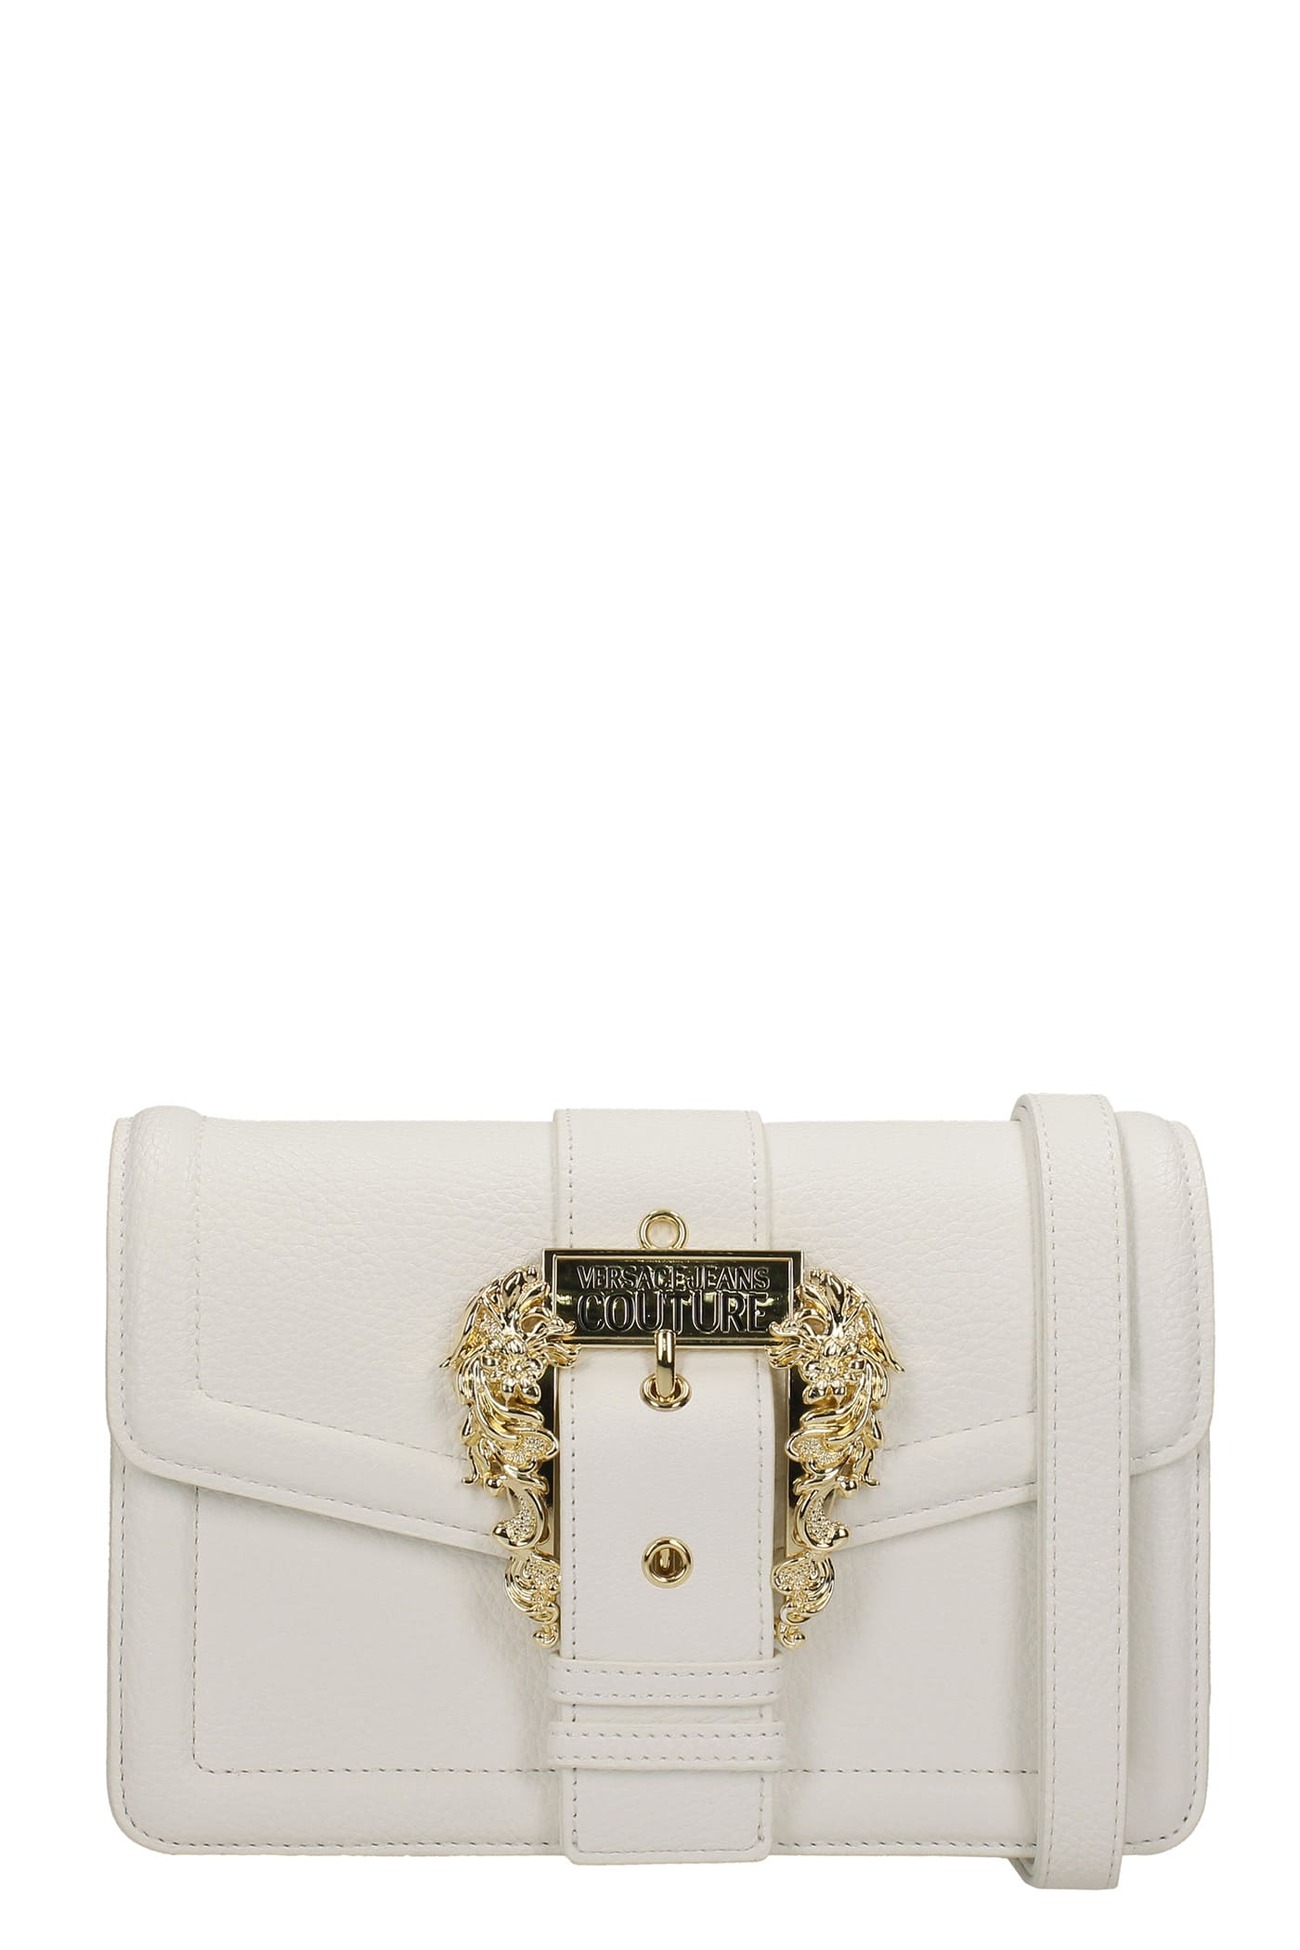 Versace Jeans Couture Shoulder Bag In White Faux Leather